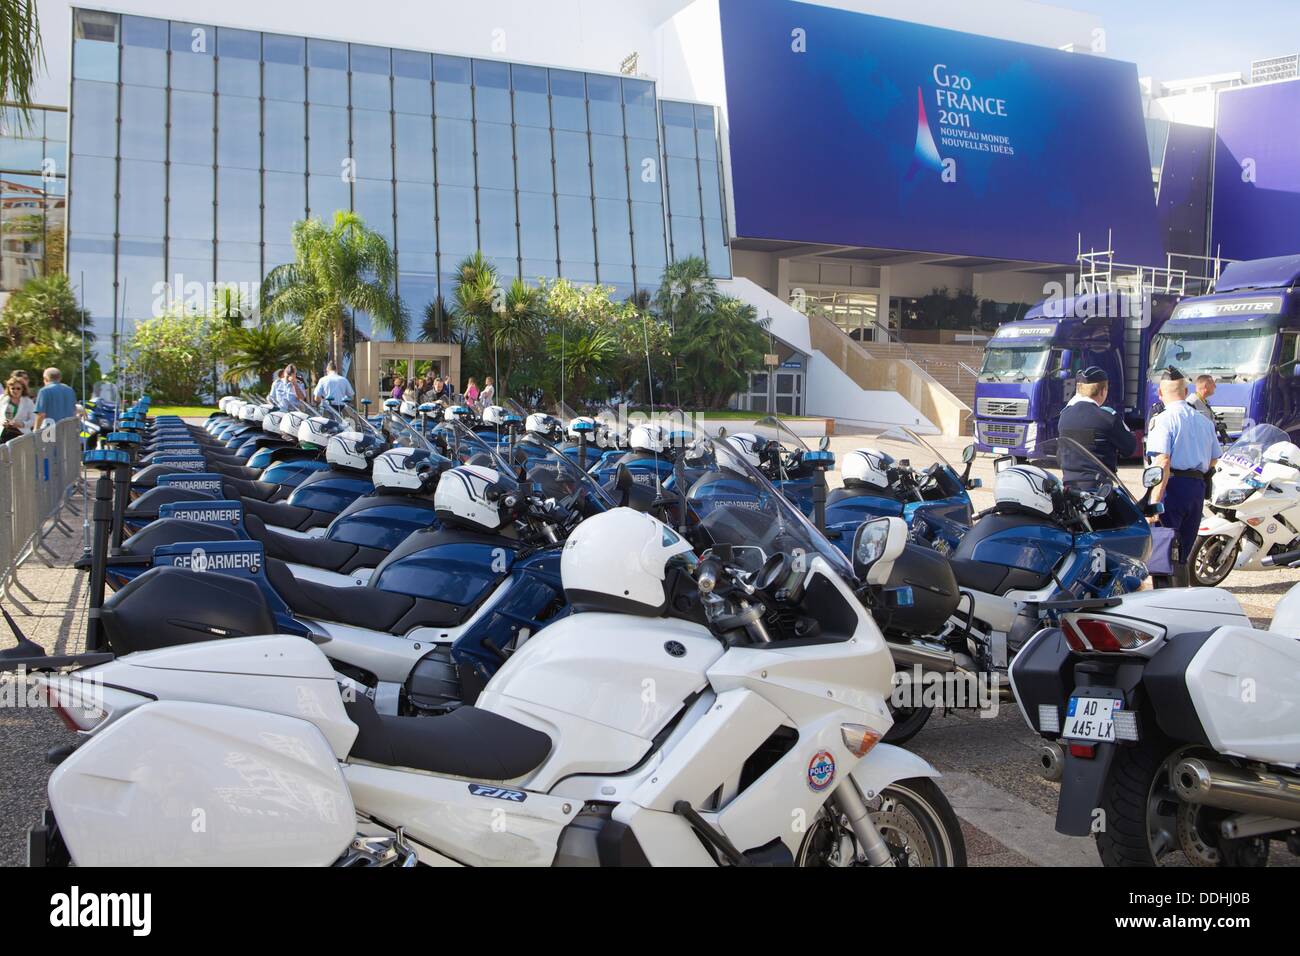 The Cannes Palais des Festival before the 2011 G-20 summit, with police forces parked next to the entrance Stock Photo